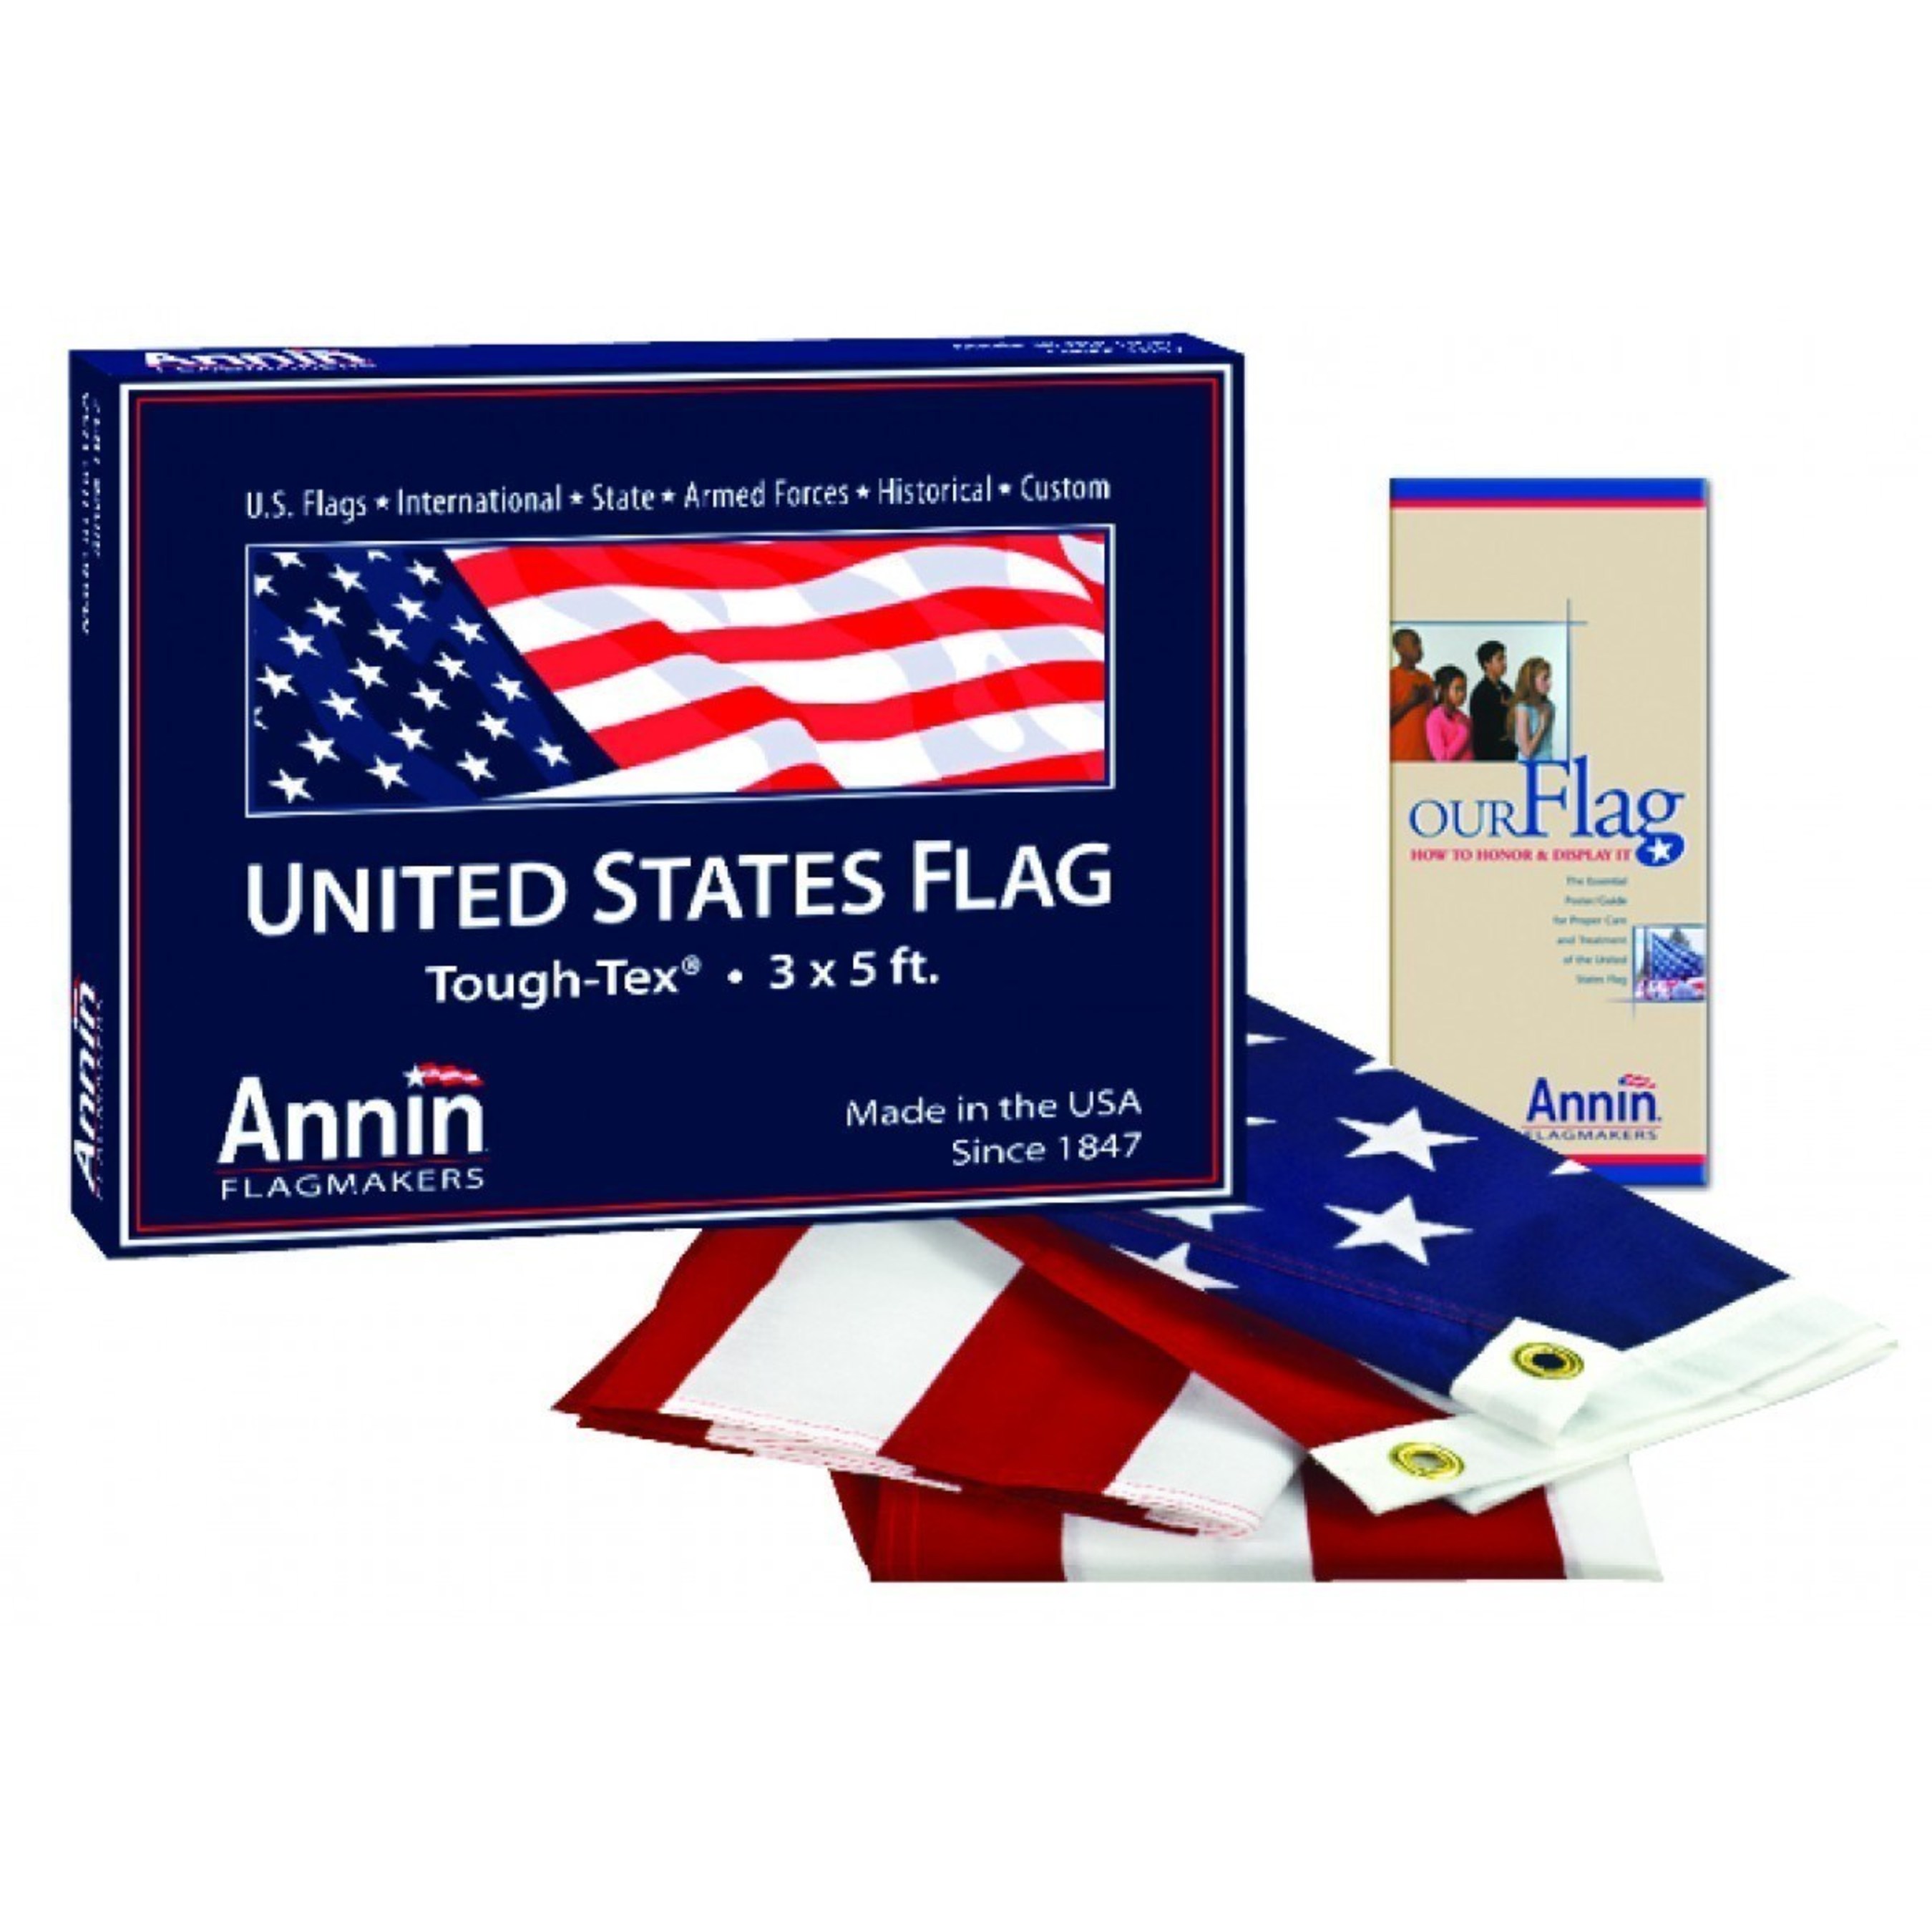 AmericanFlags.com sells only American-made US flags.